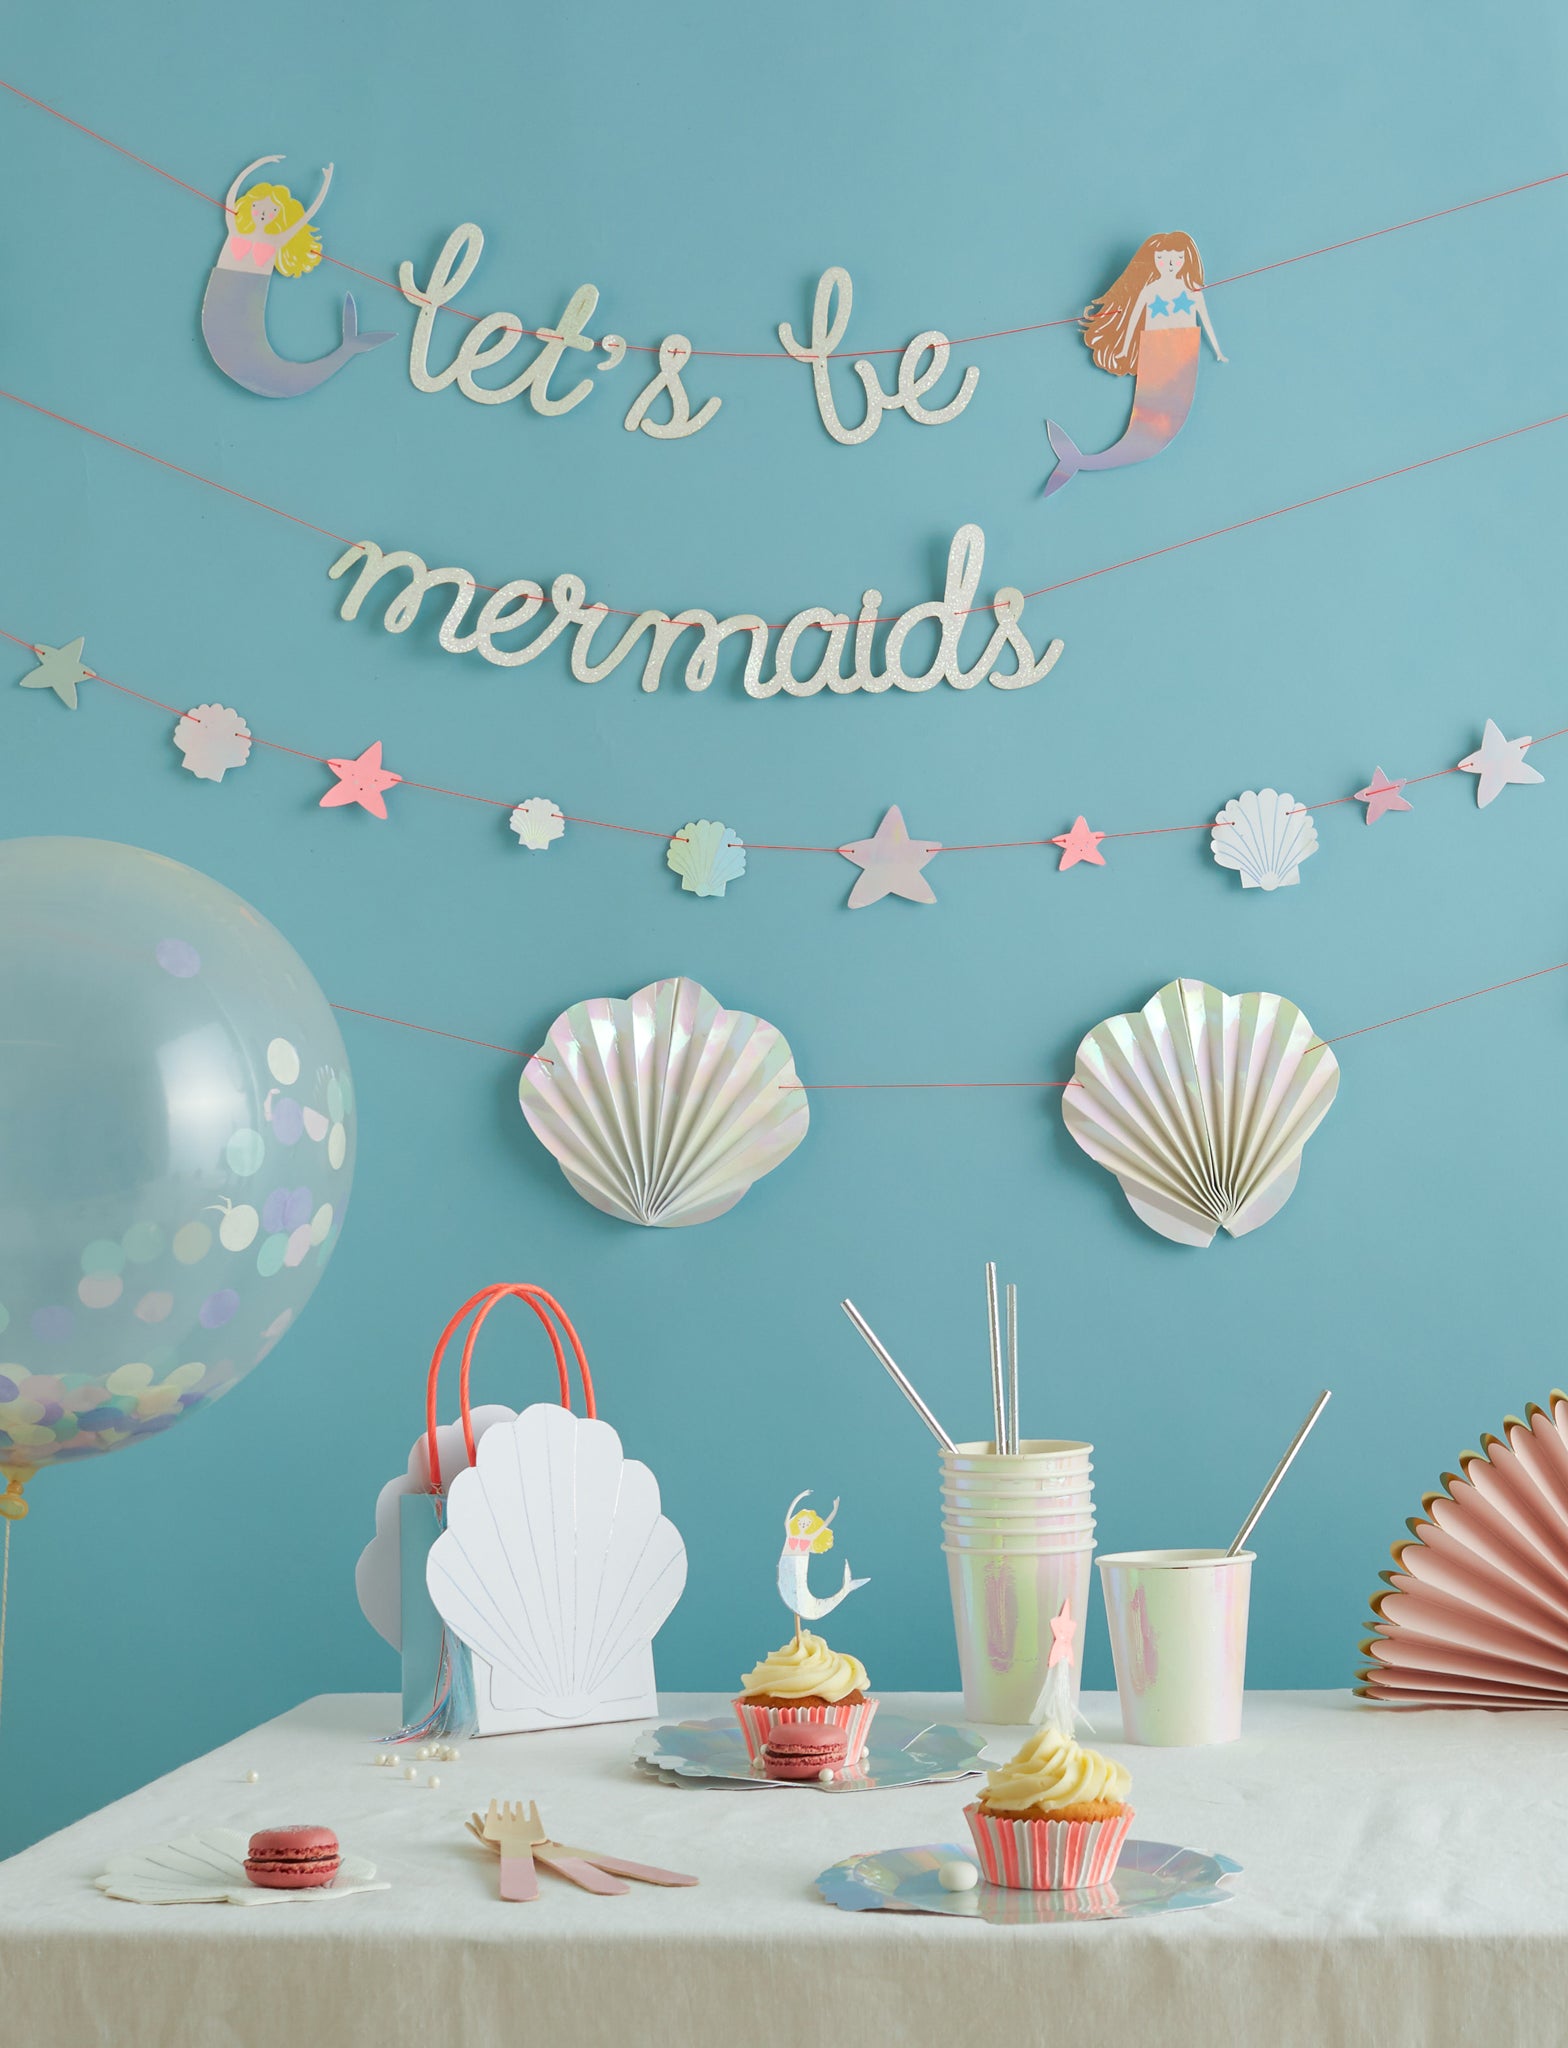 Mermaid Party Supplies, Tableware, and Decorations